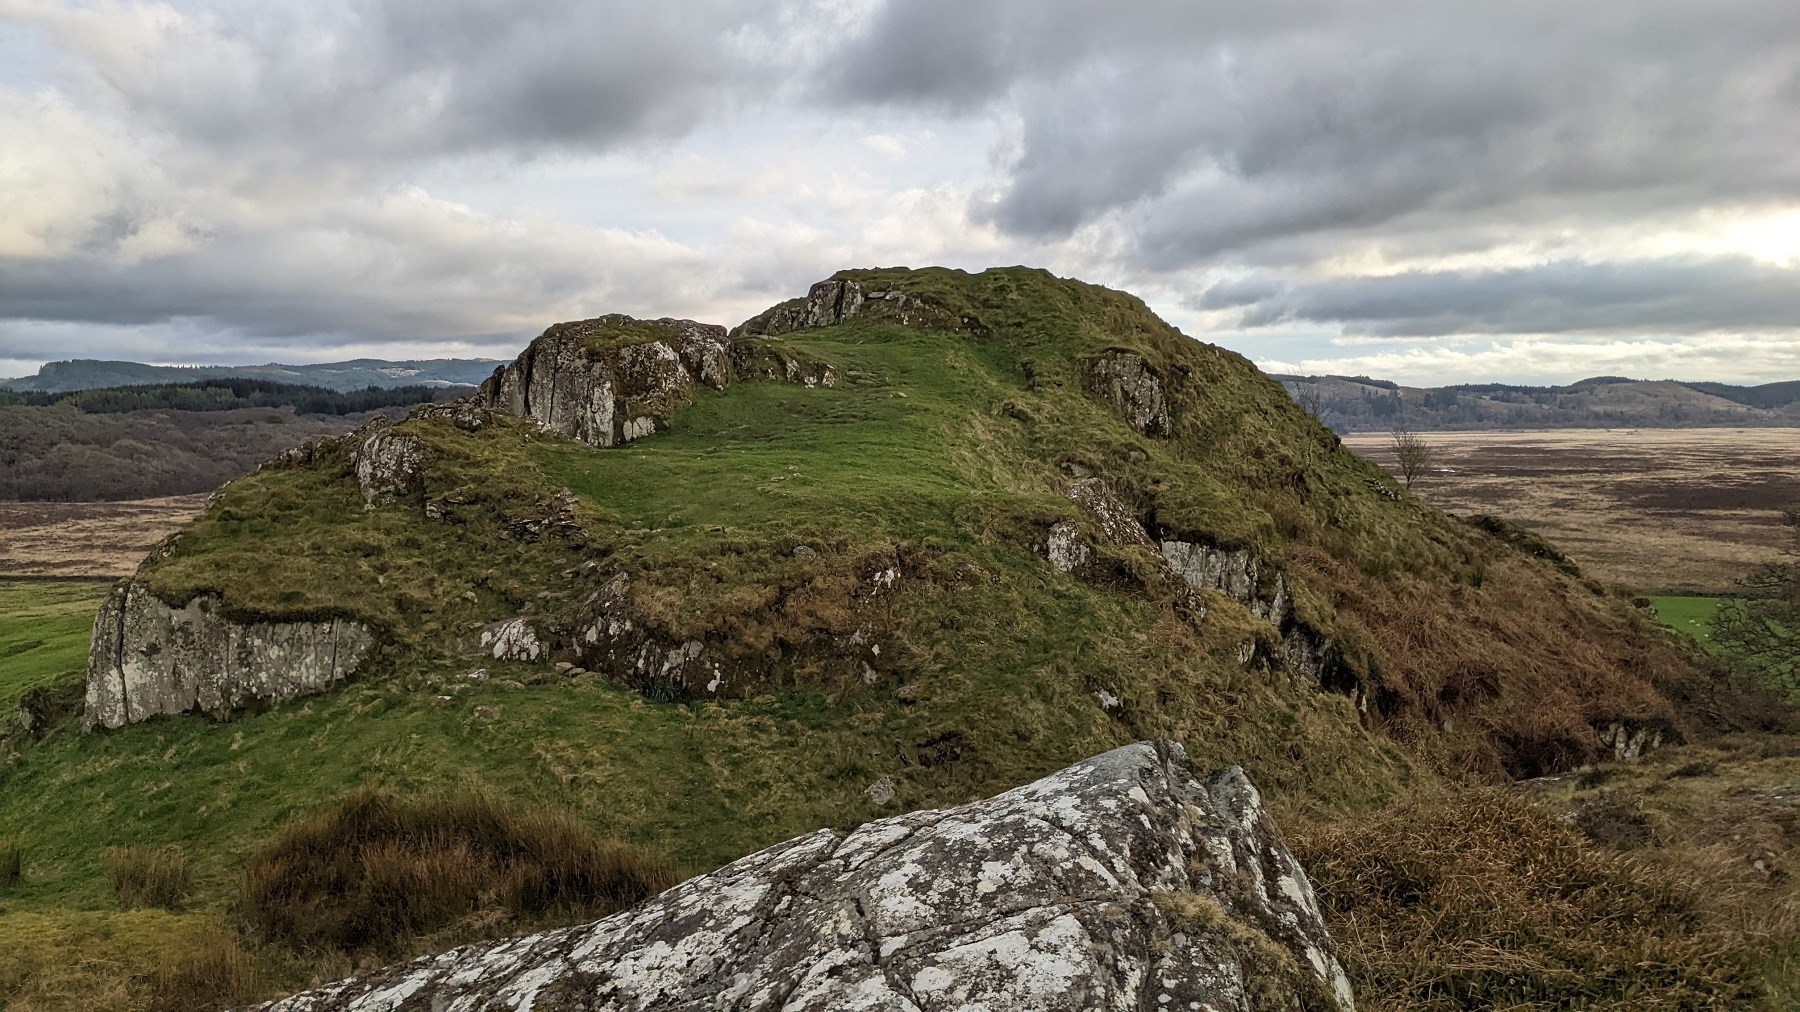 A rocky crag and a view to the old Citiadel at Dunadd hillfort.